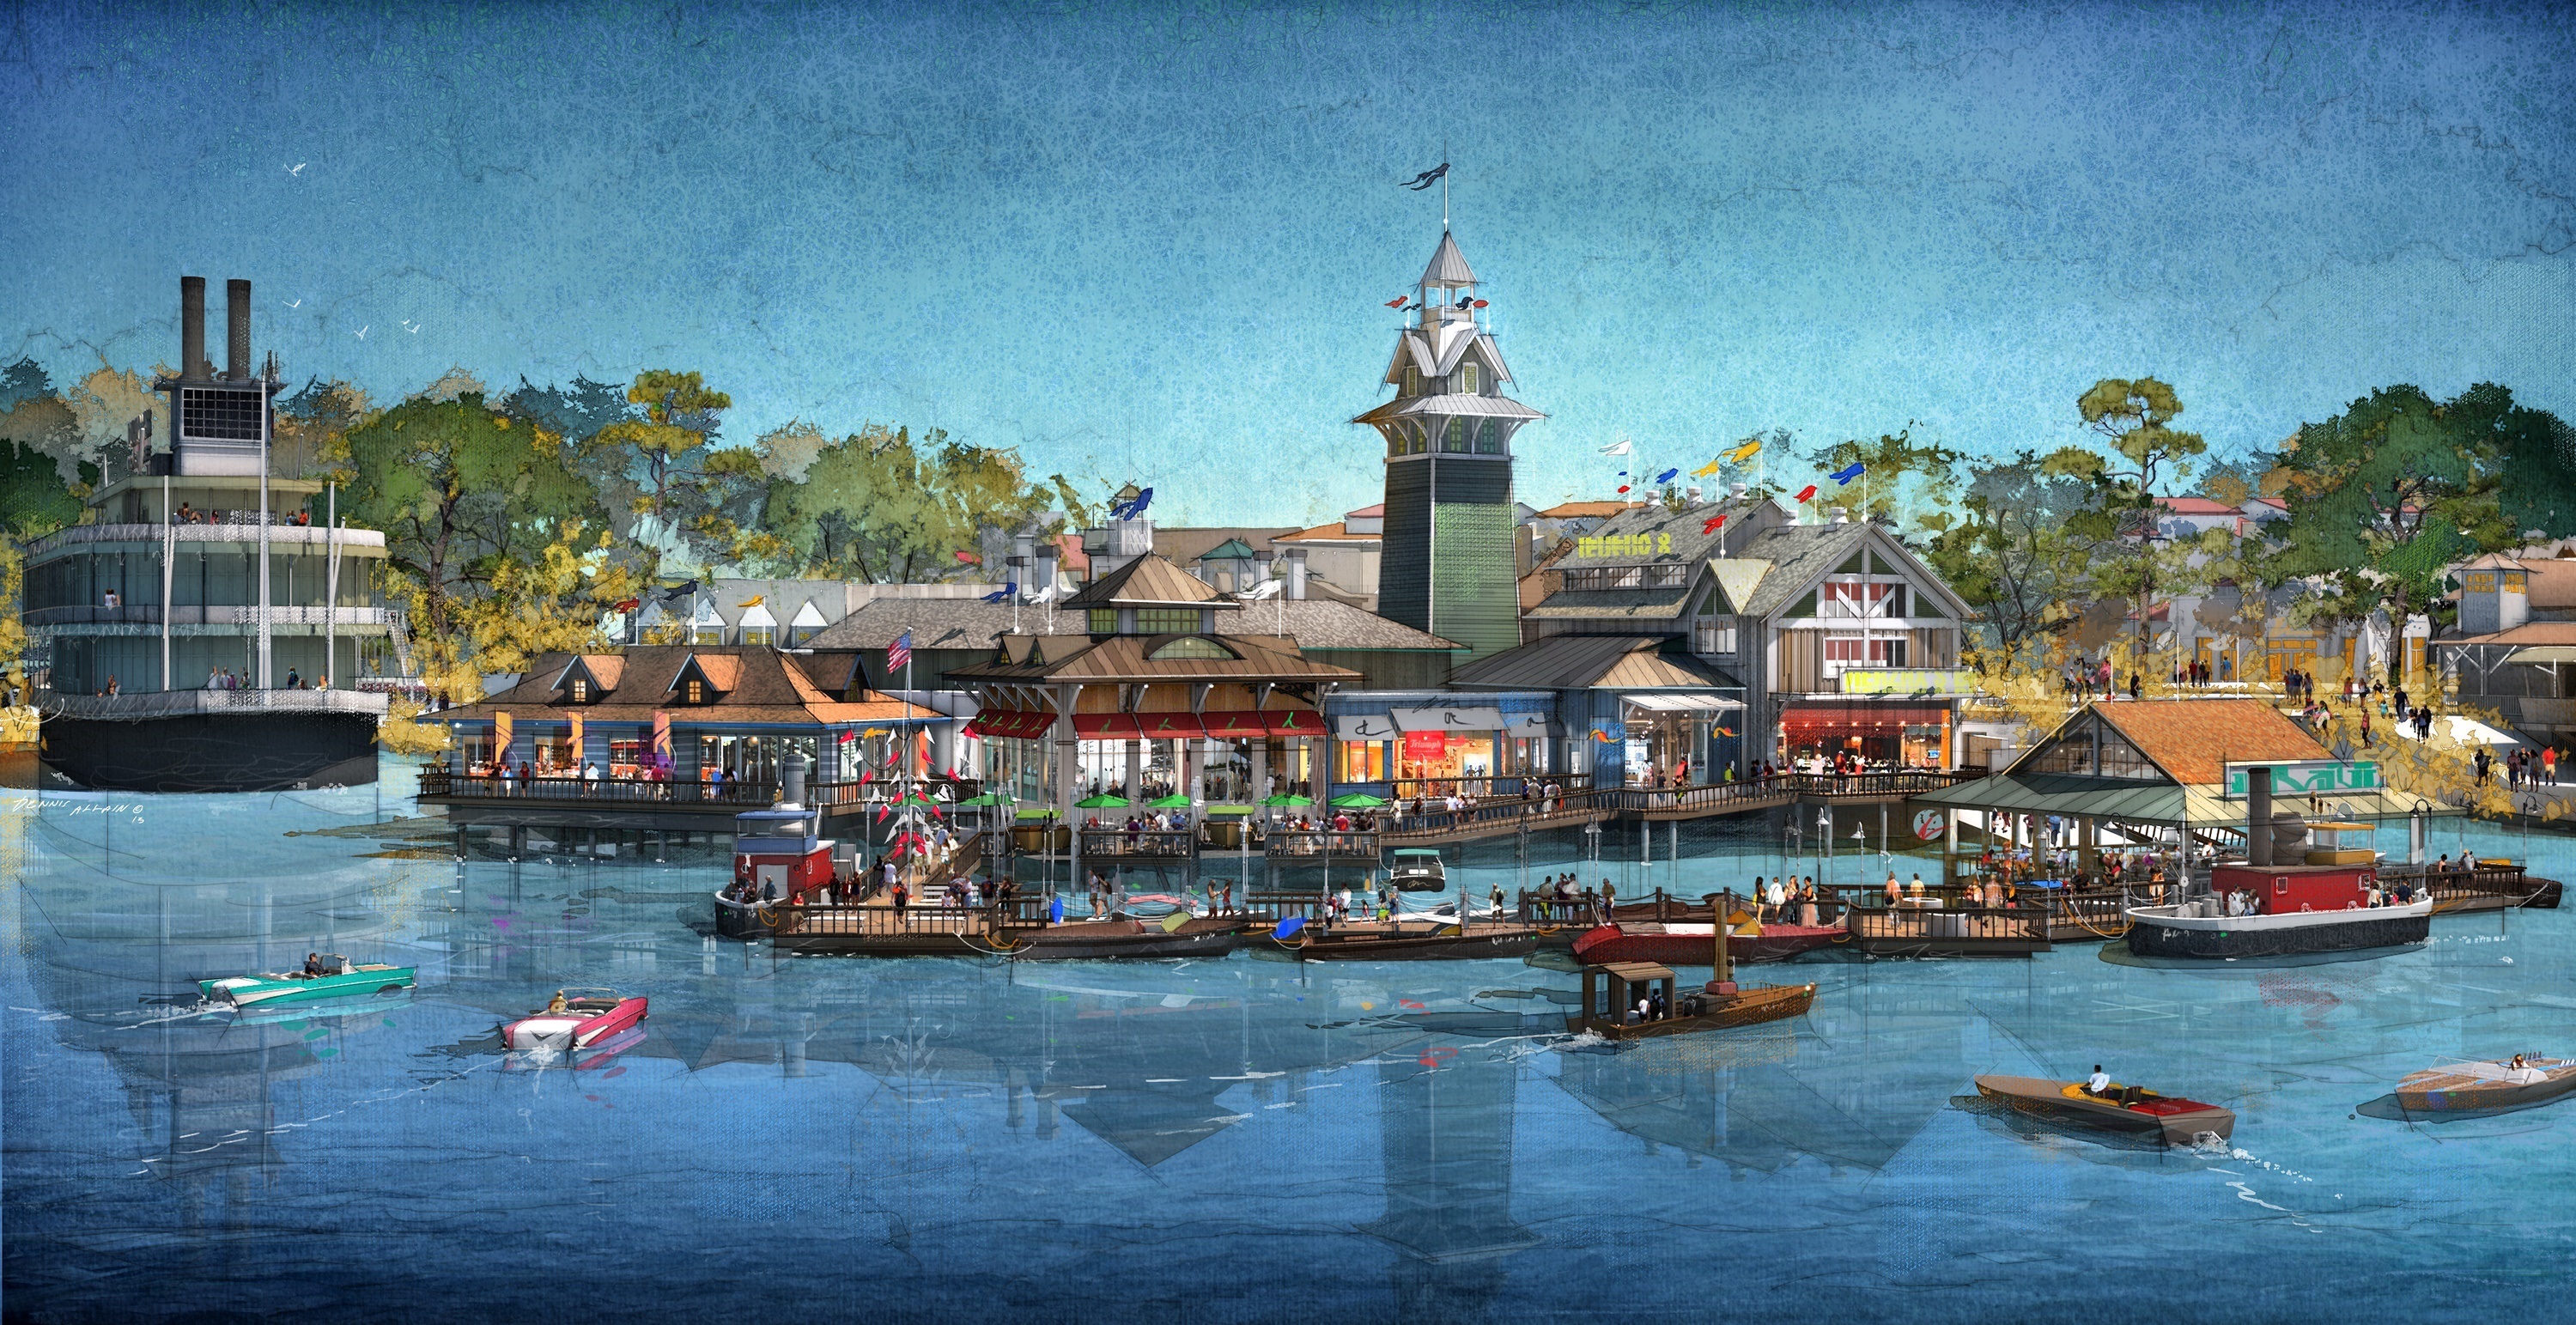 The Boathouse Rendering